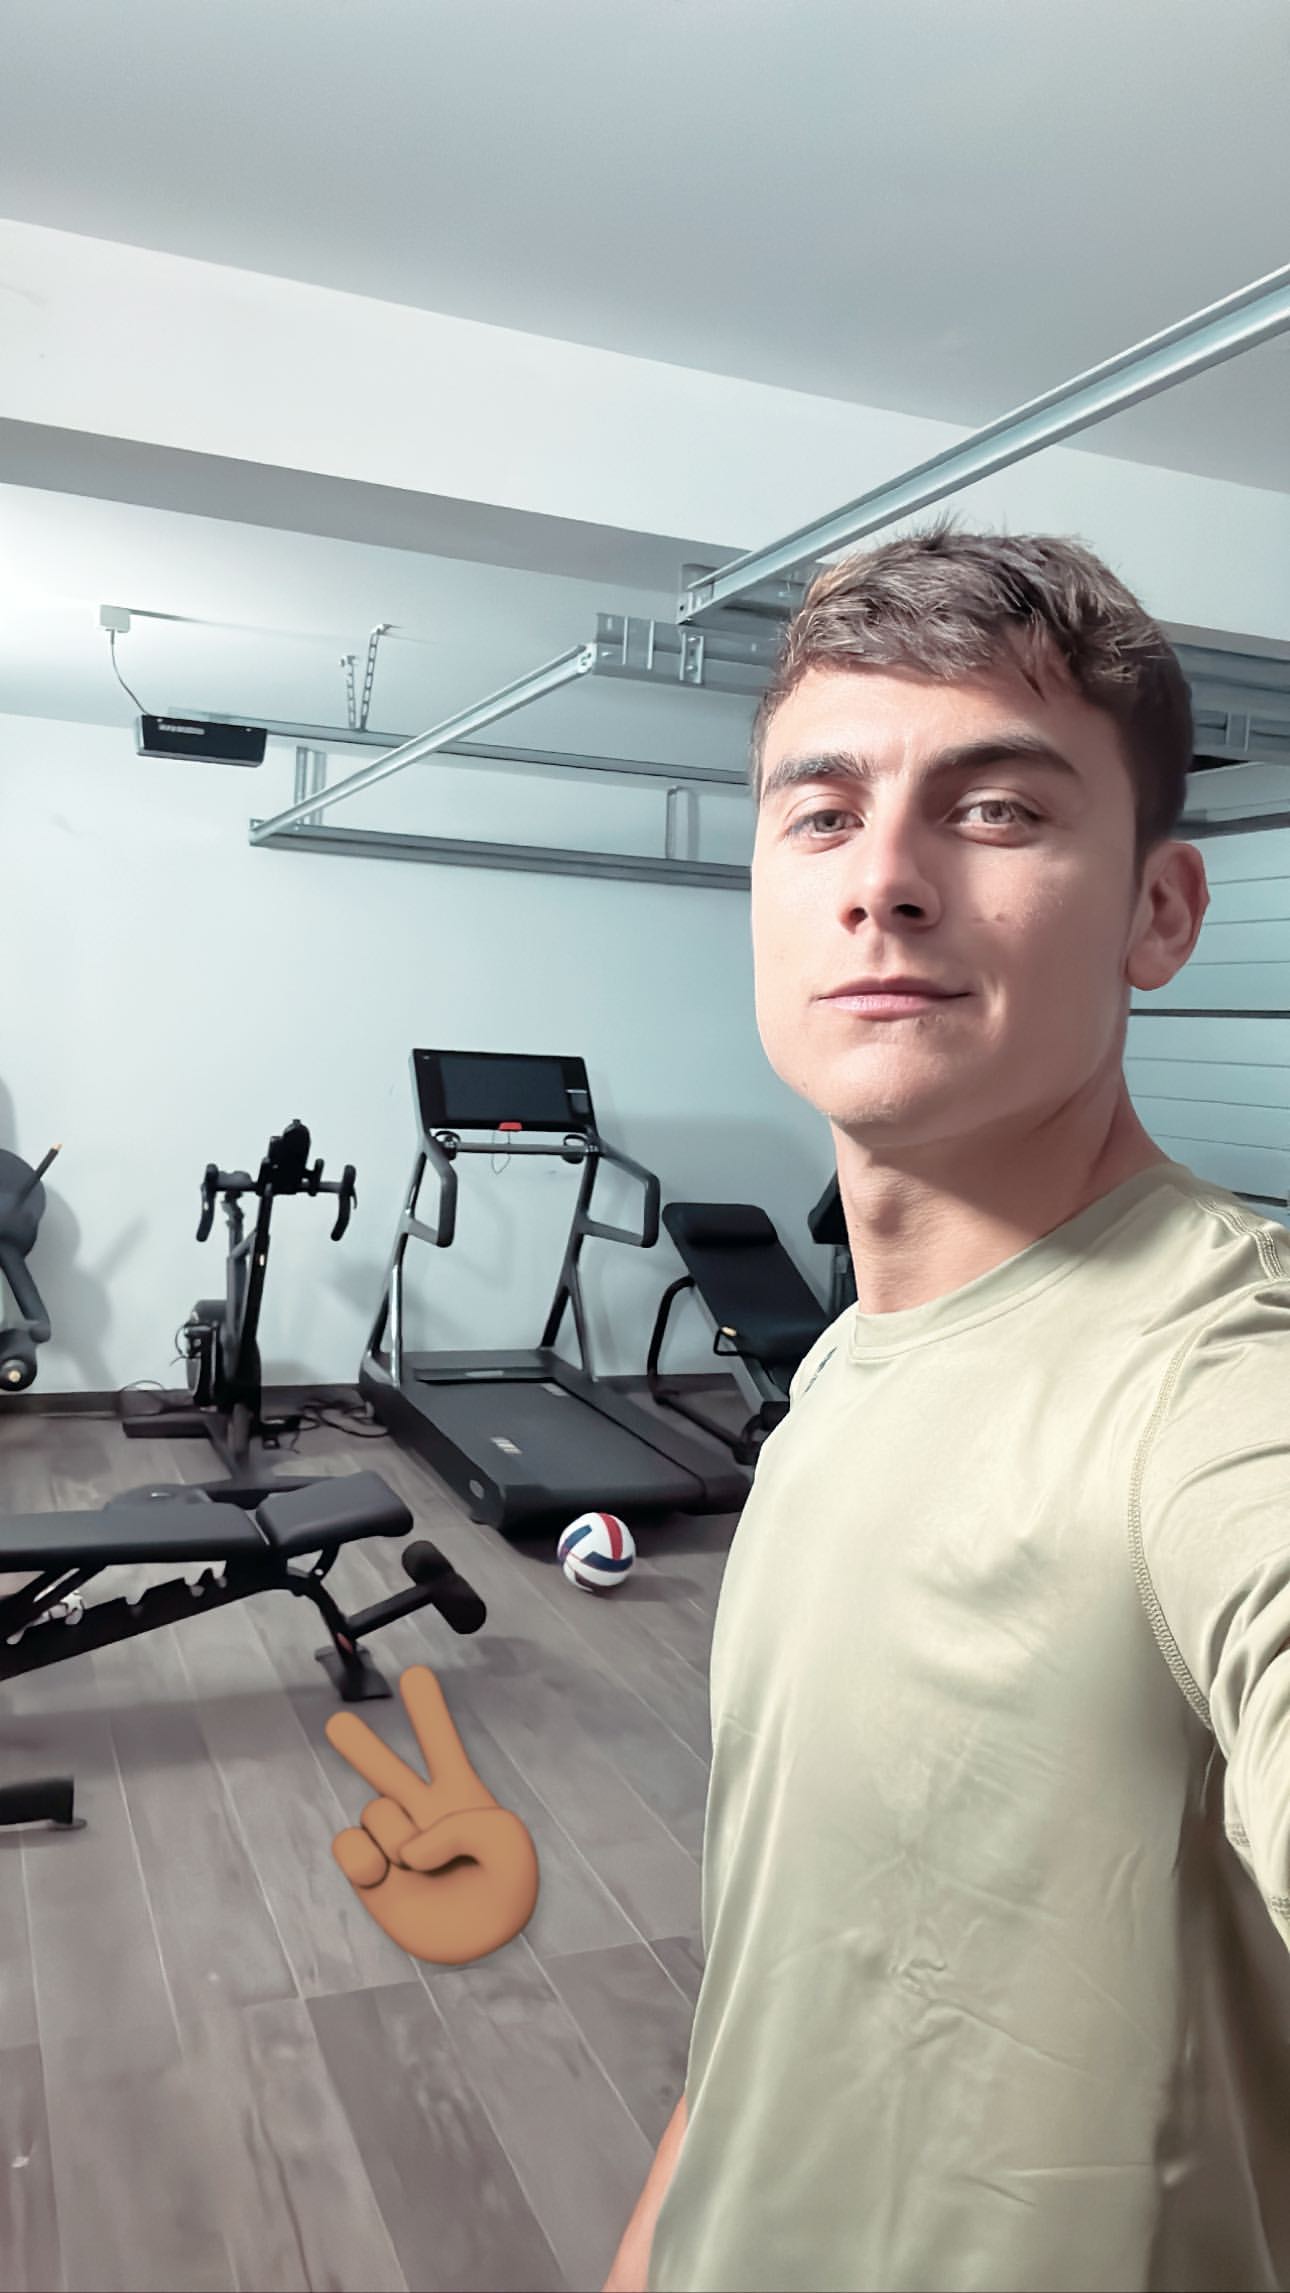 Dybala si allena in palestra